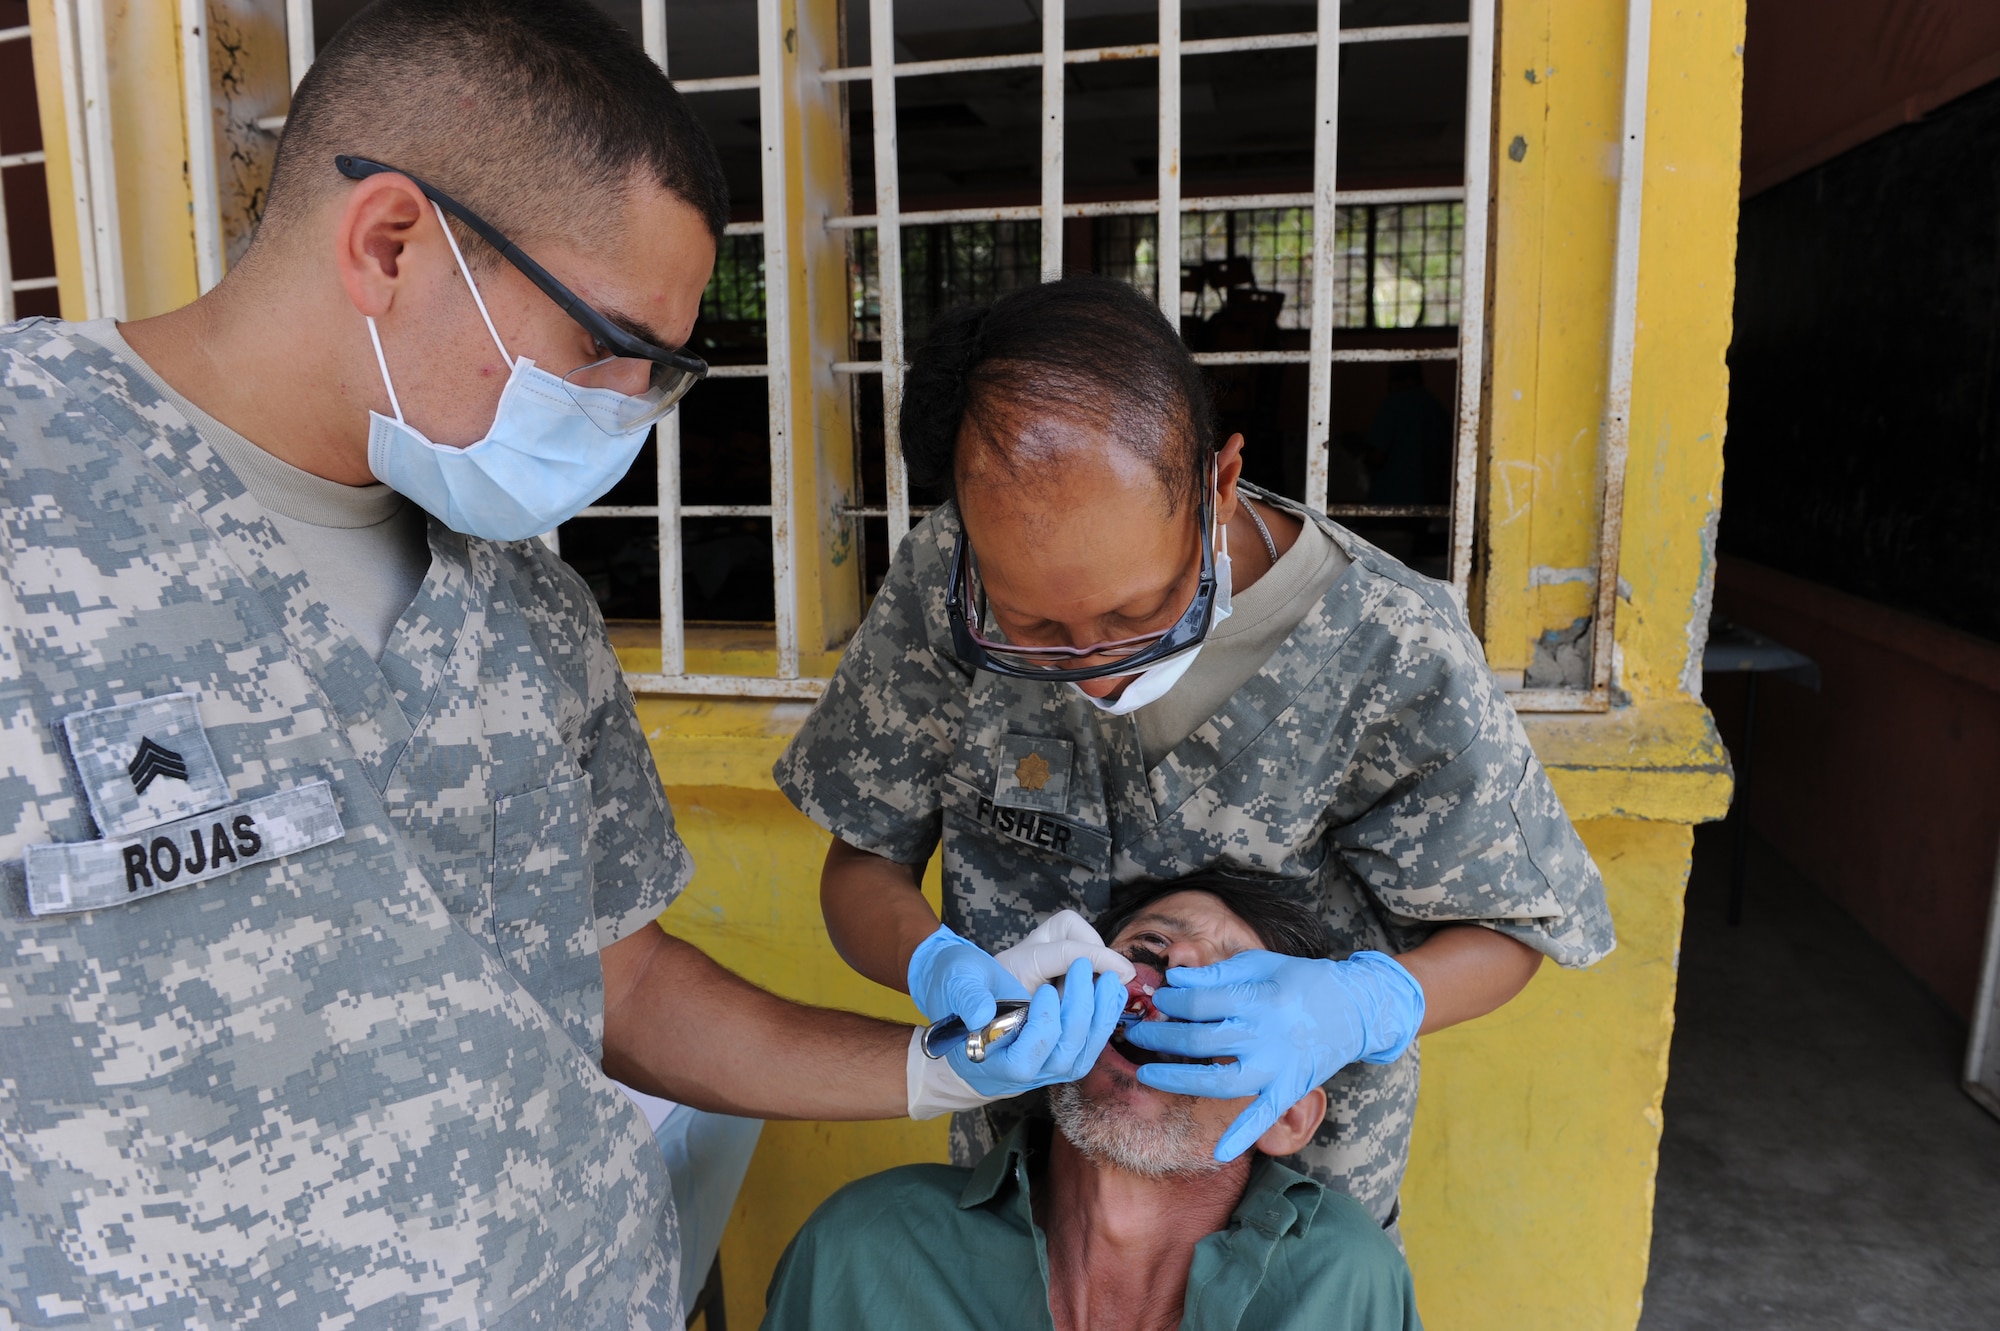 U.S. Army Sgt. Anthony Rojas, Joint Task Force-Bravo Operating Room Technician assist U.S. Army Maj. Perdita Fisher, Joint Task Force-Bravo Dentist, in a tooth extraction during a Medical Readiness exercise, May 6. Joint Task force-Bravo partnered with Honduran Ministry of Health and Honduran military personnel, to provide medical services to more than 500 Cuesta de la Virgen community members. (Photo by Martin Chahin)